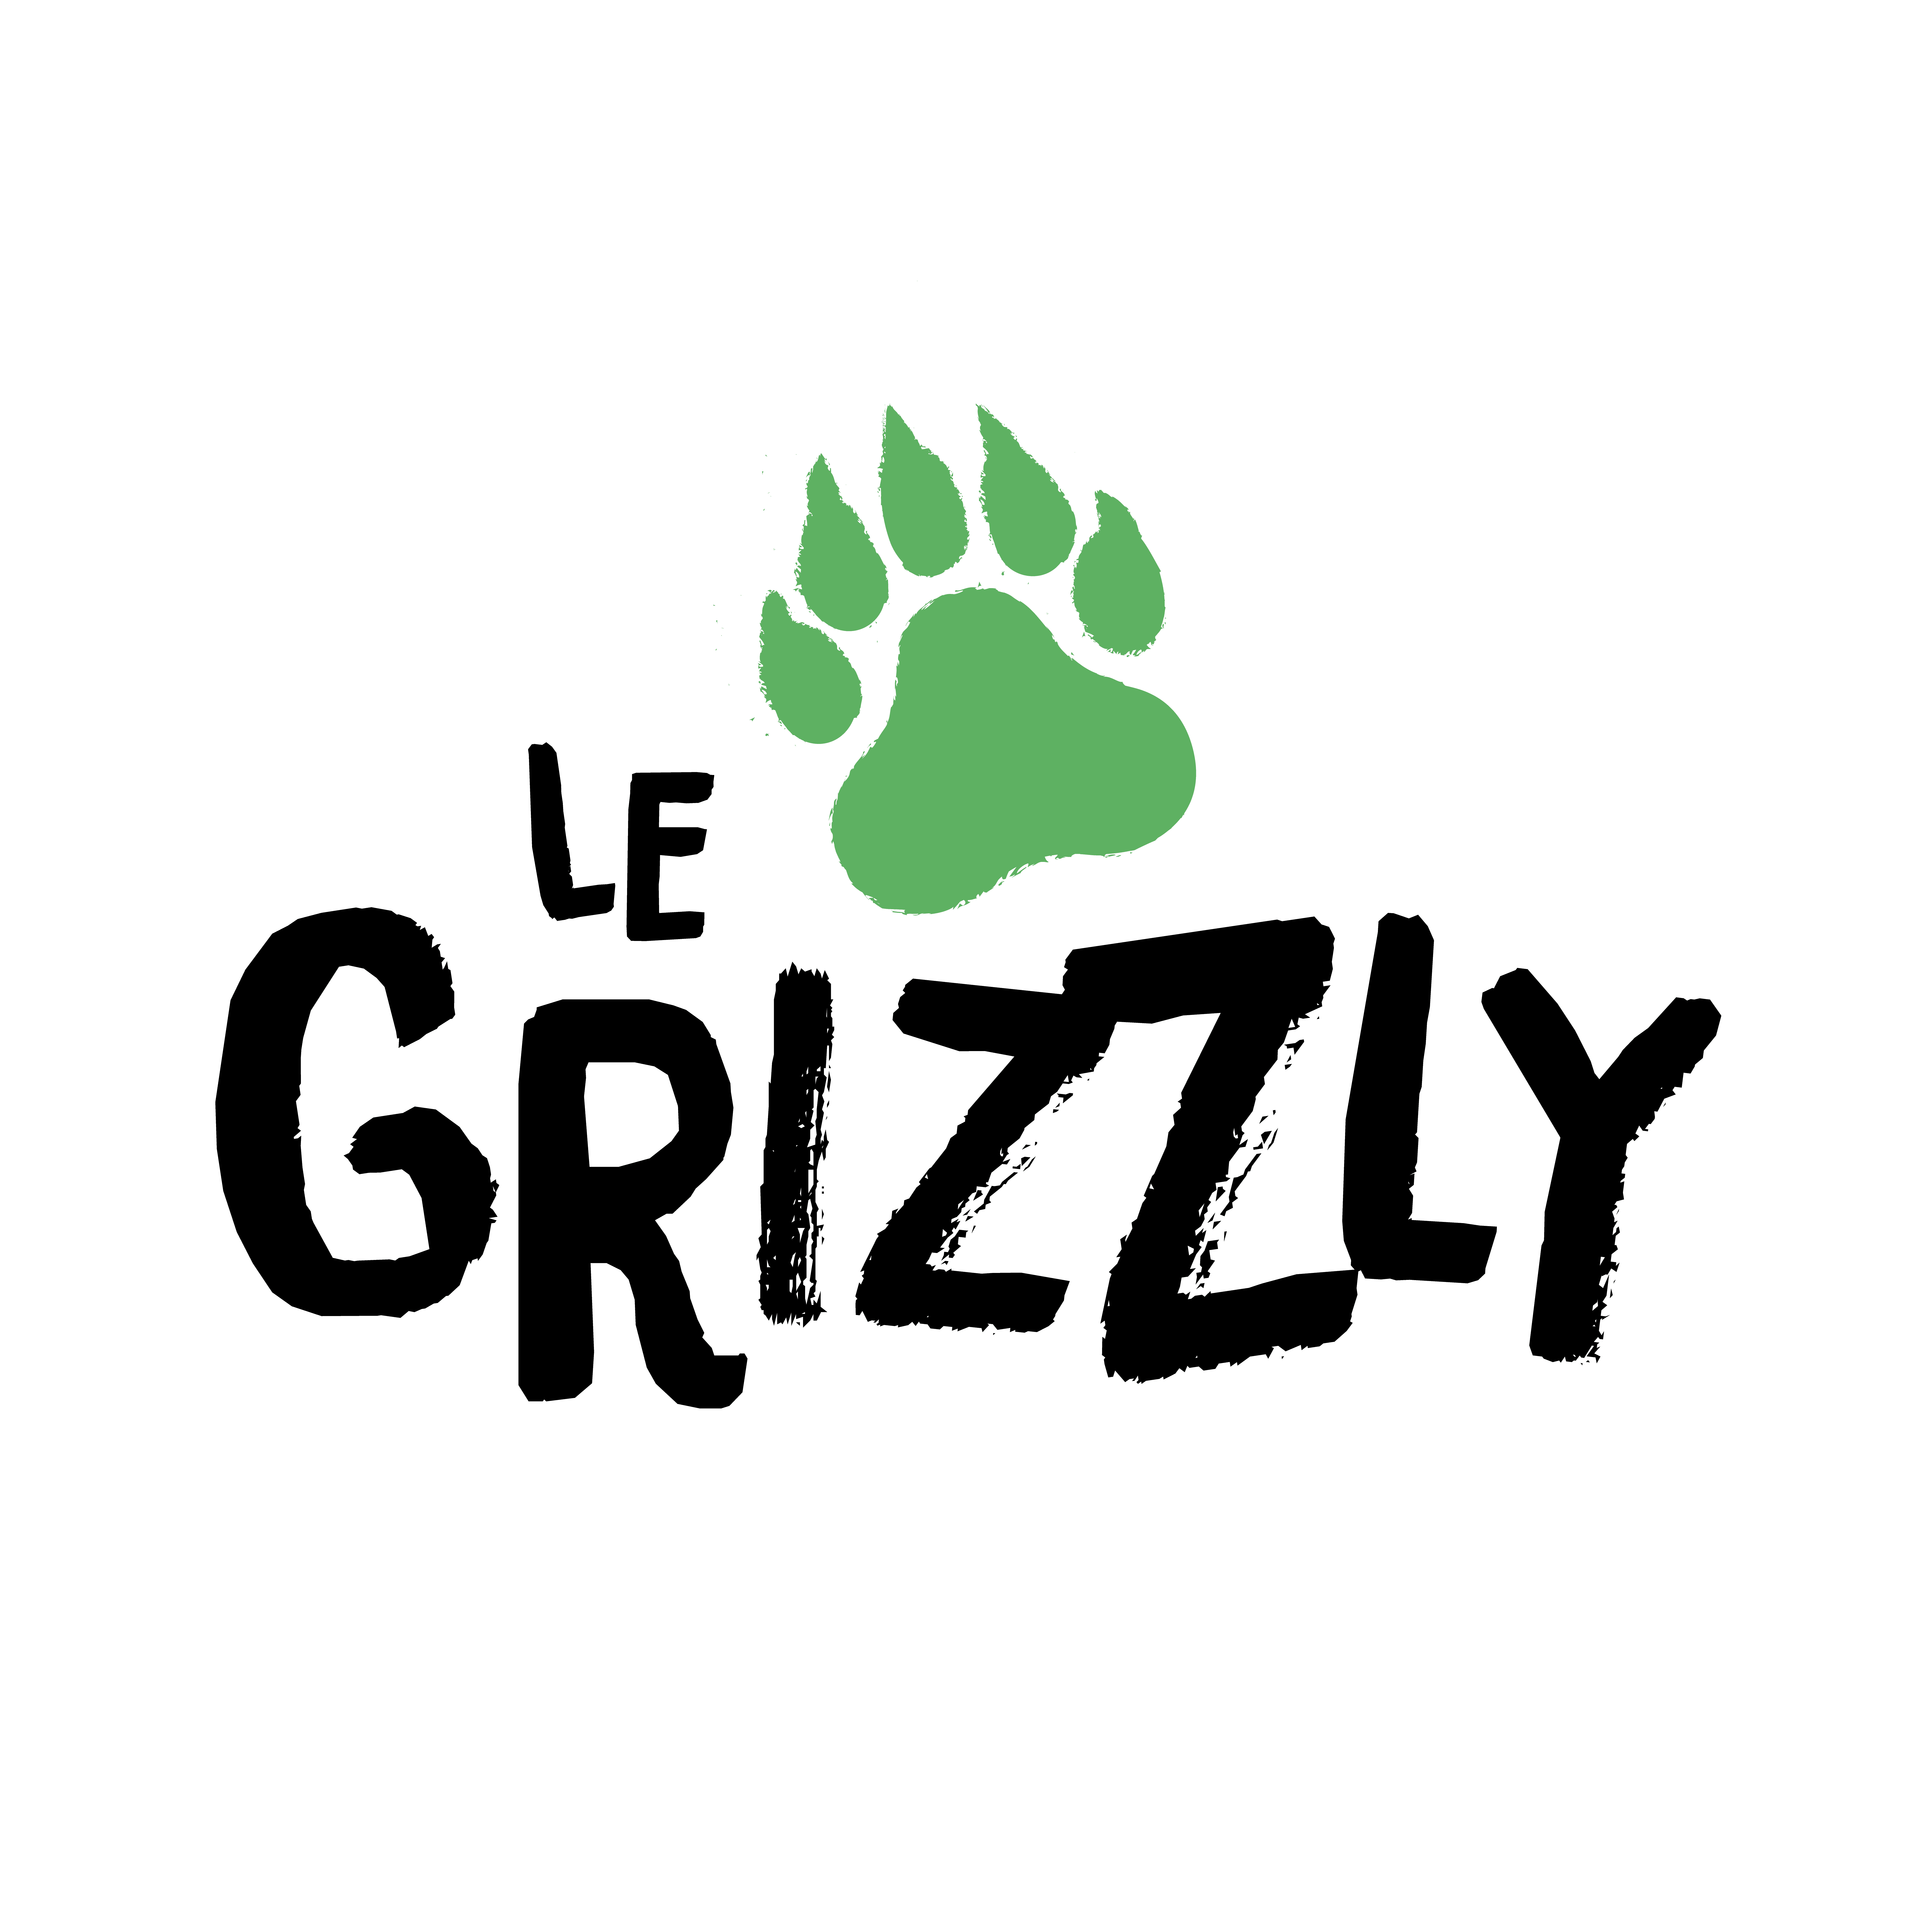 Logo LE GRIZZLY